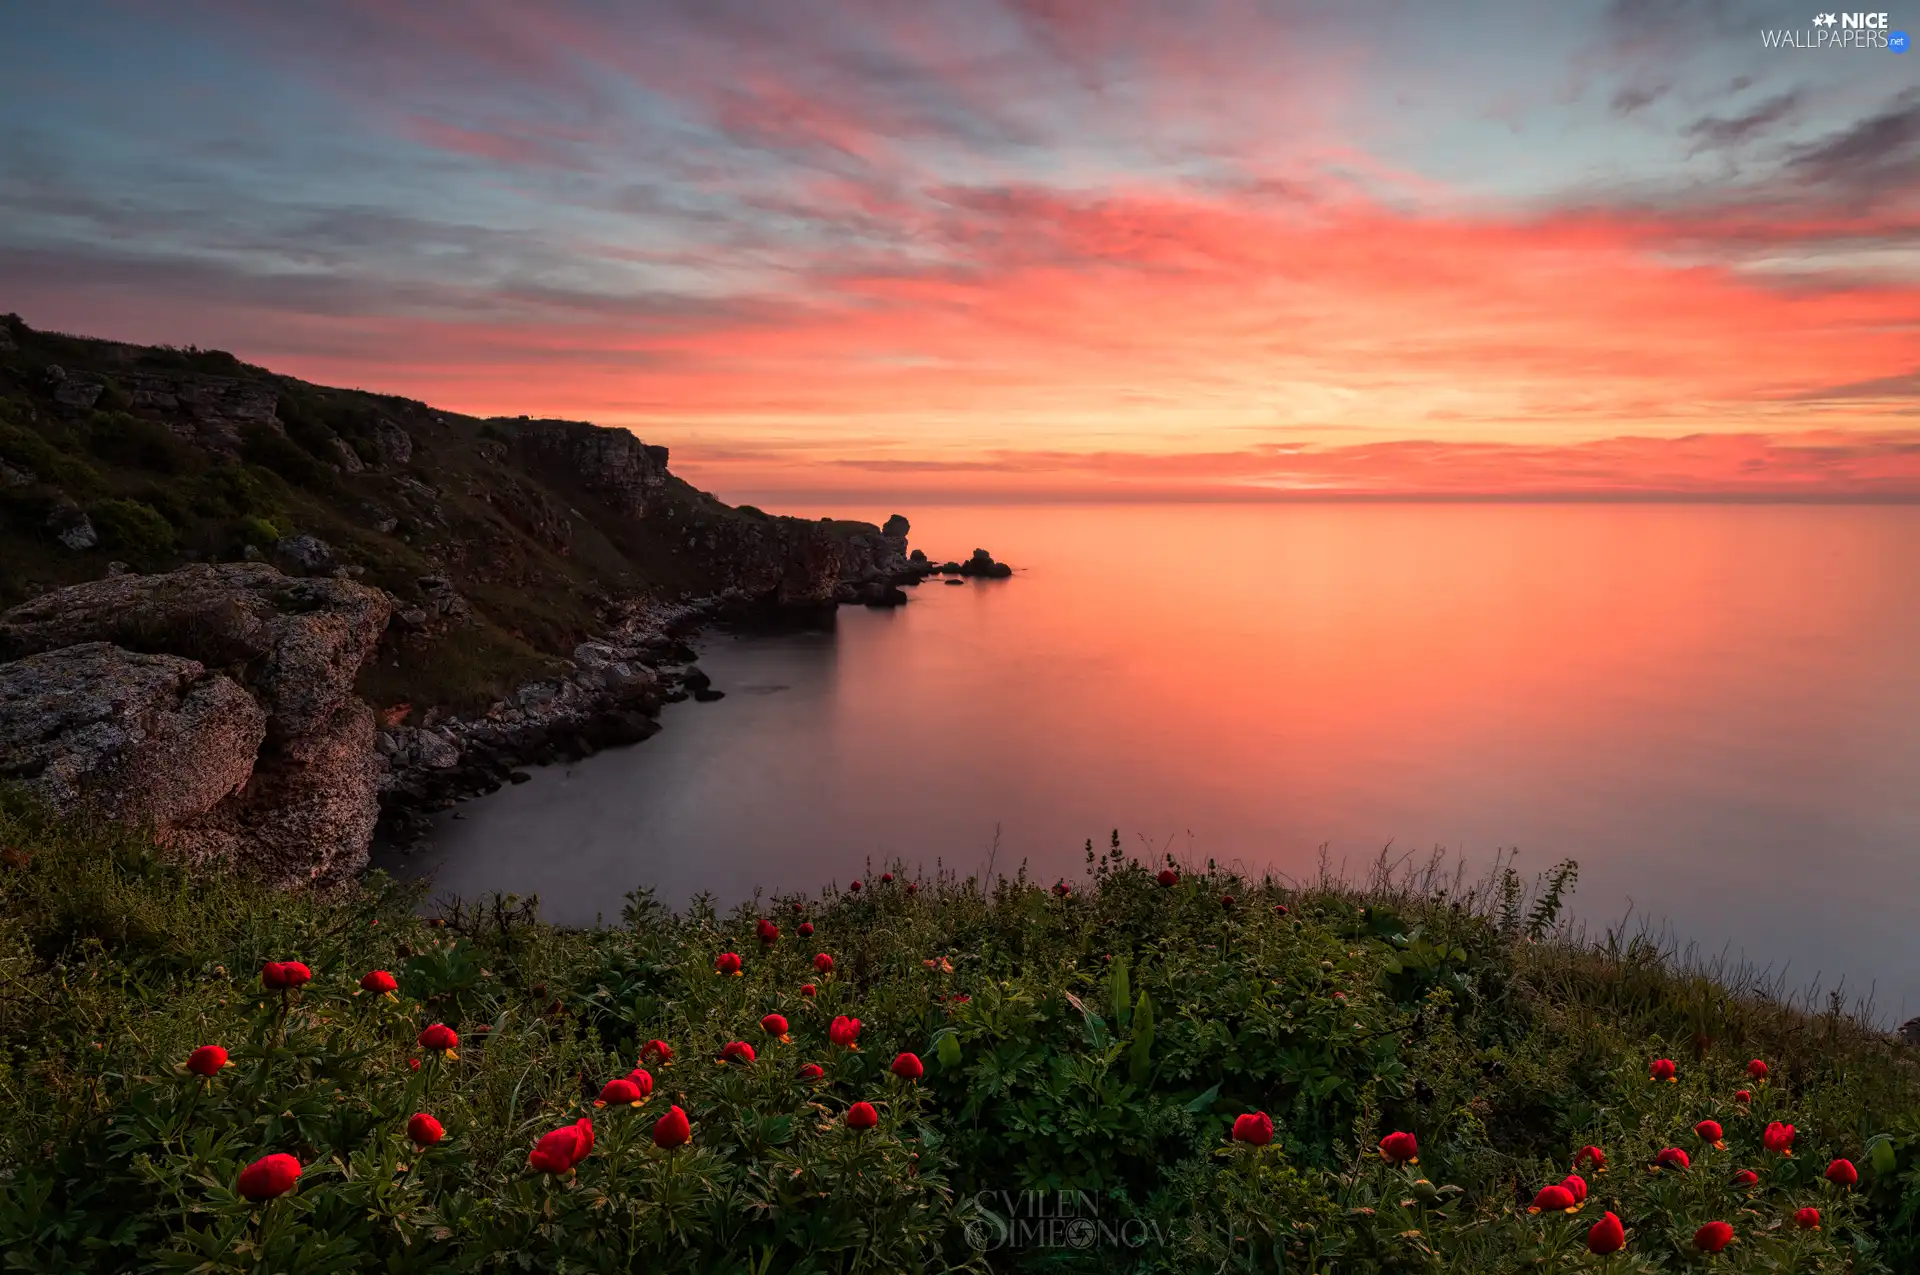 Great Sunsets, Coast, Flowers